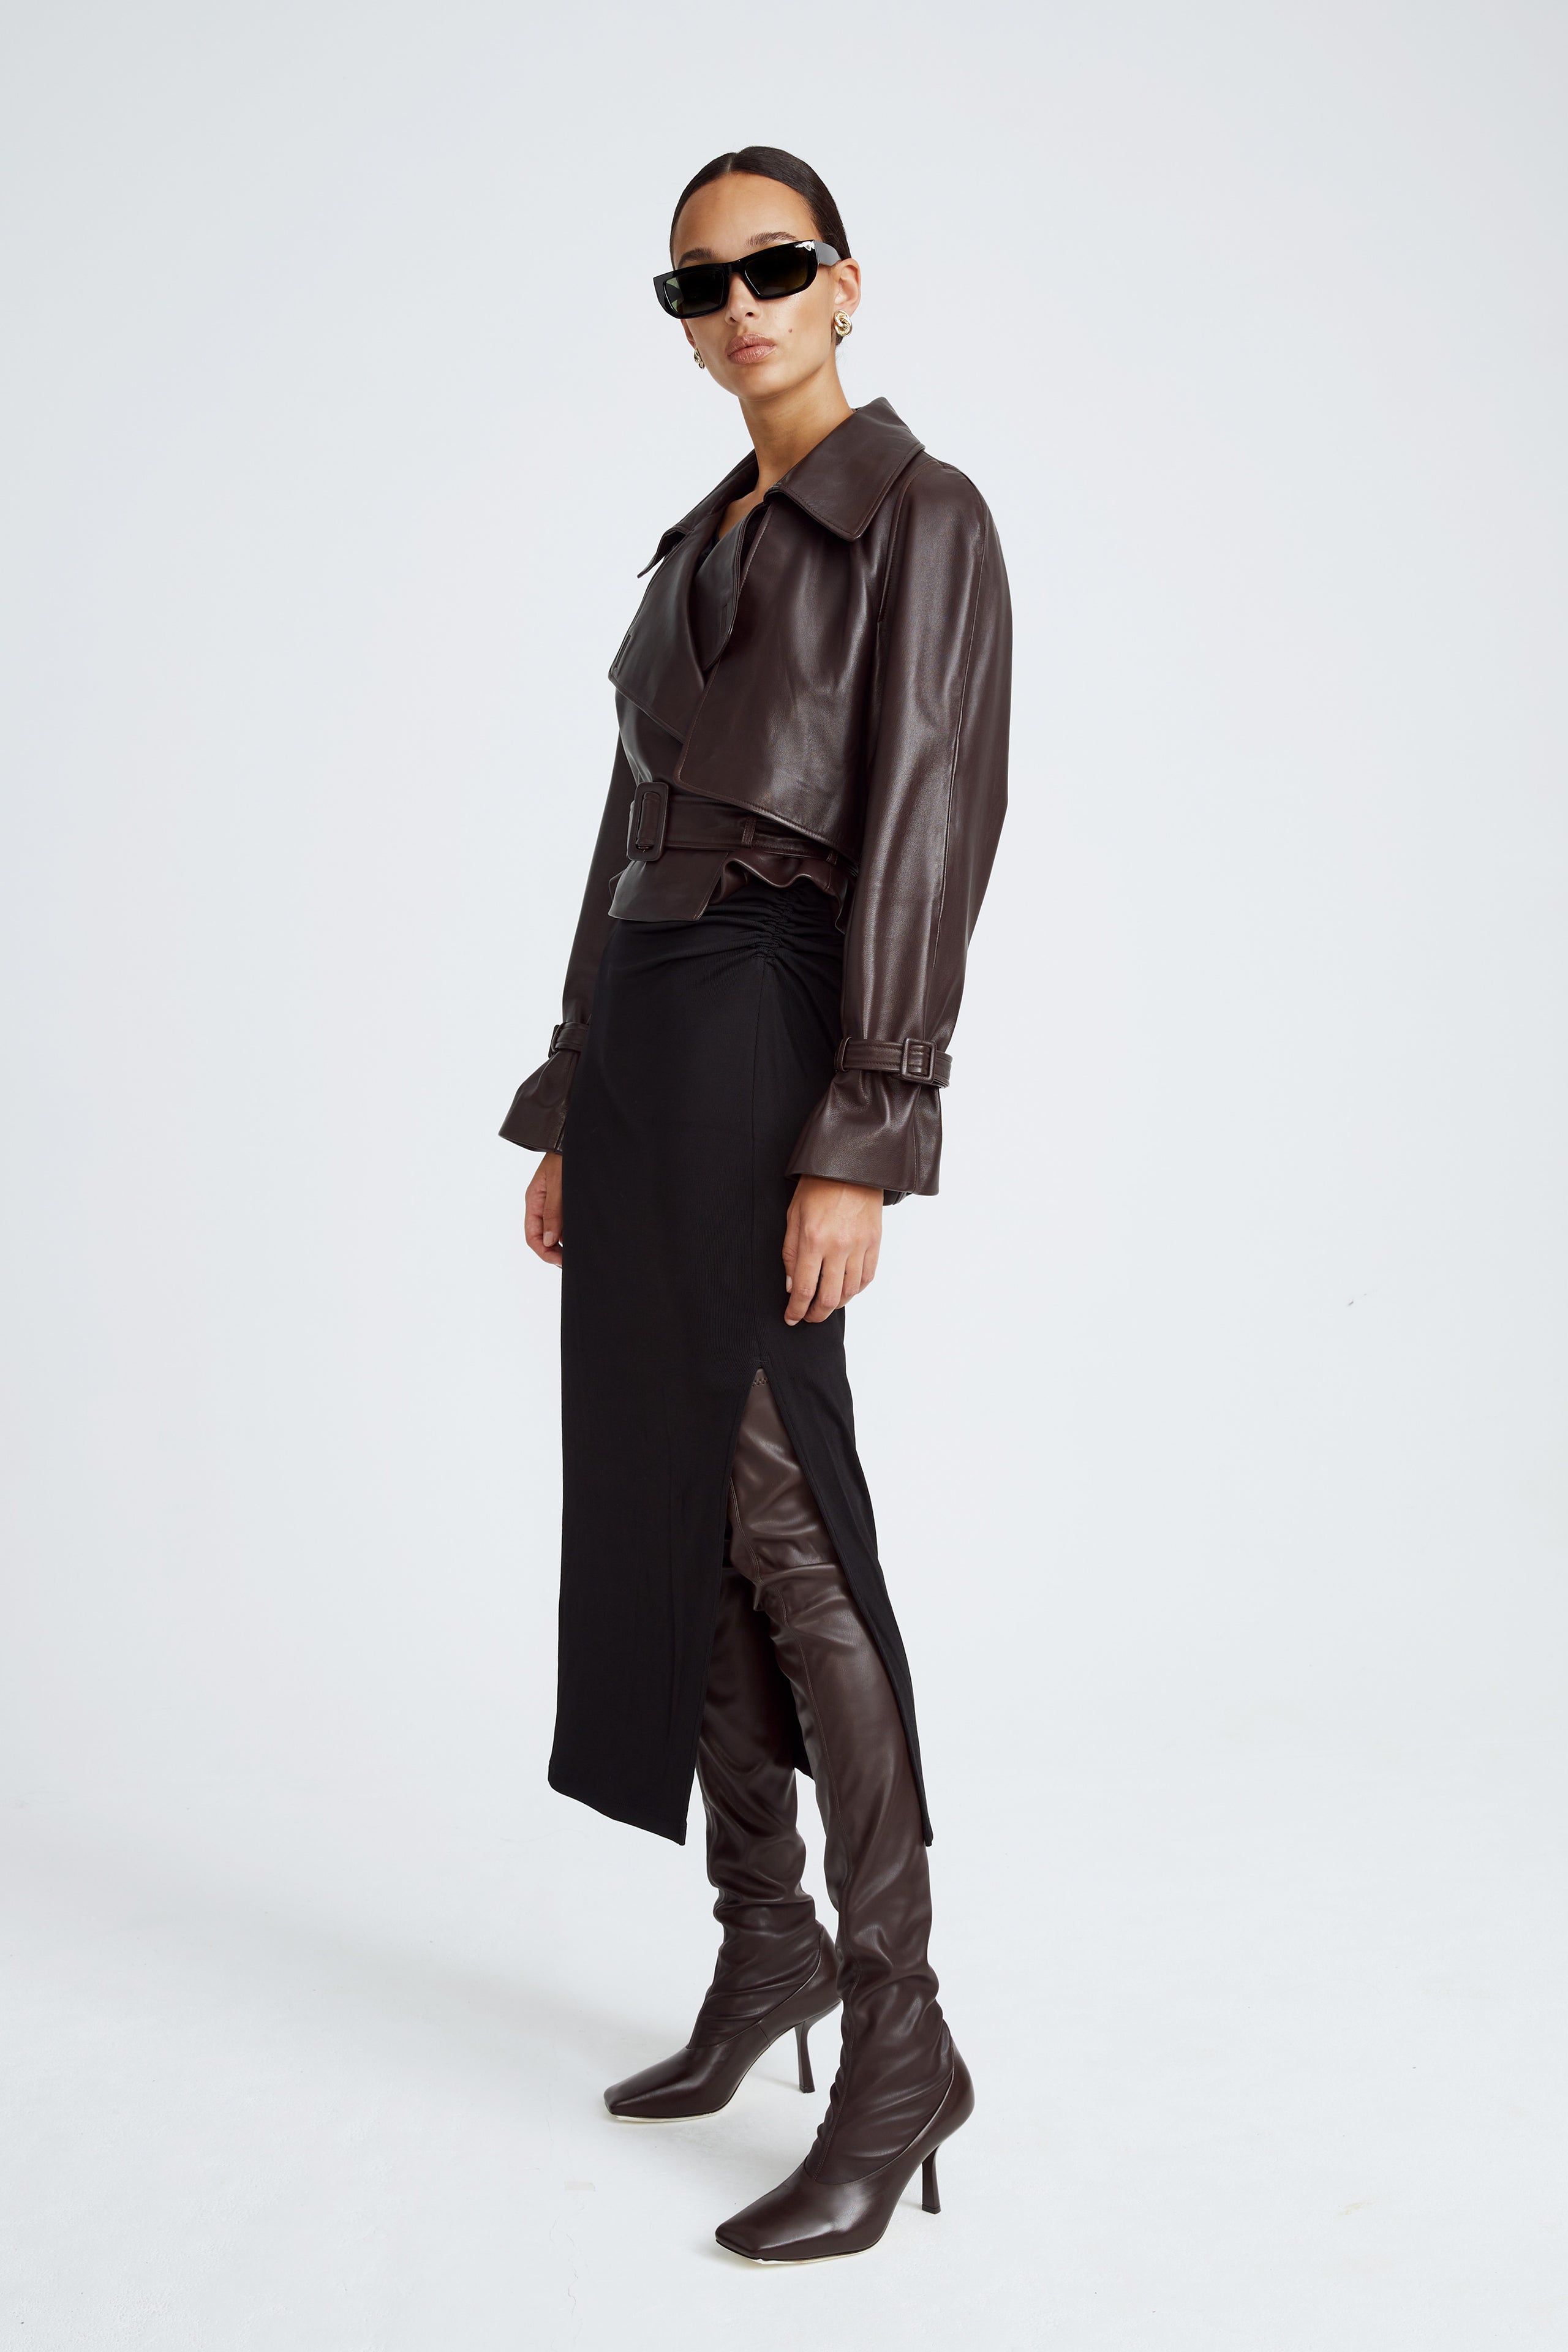 Model is wearing the Hatti Dark Chocolate Cropped Leather Jacket Side